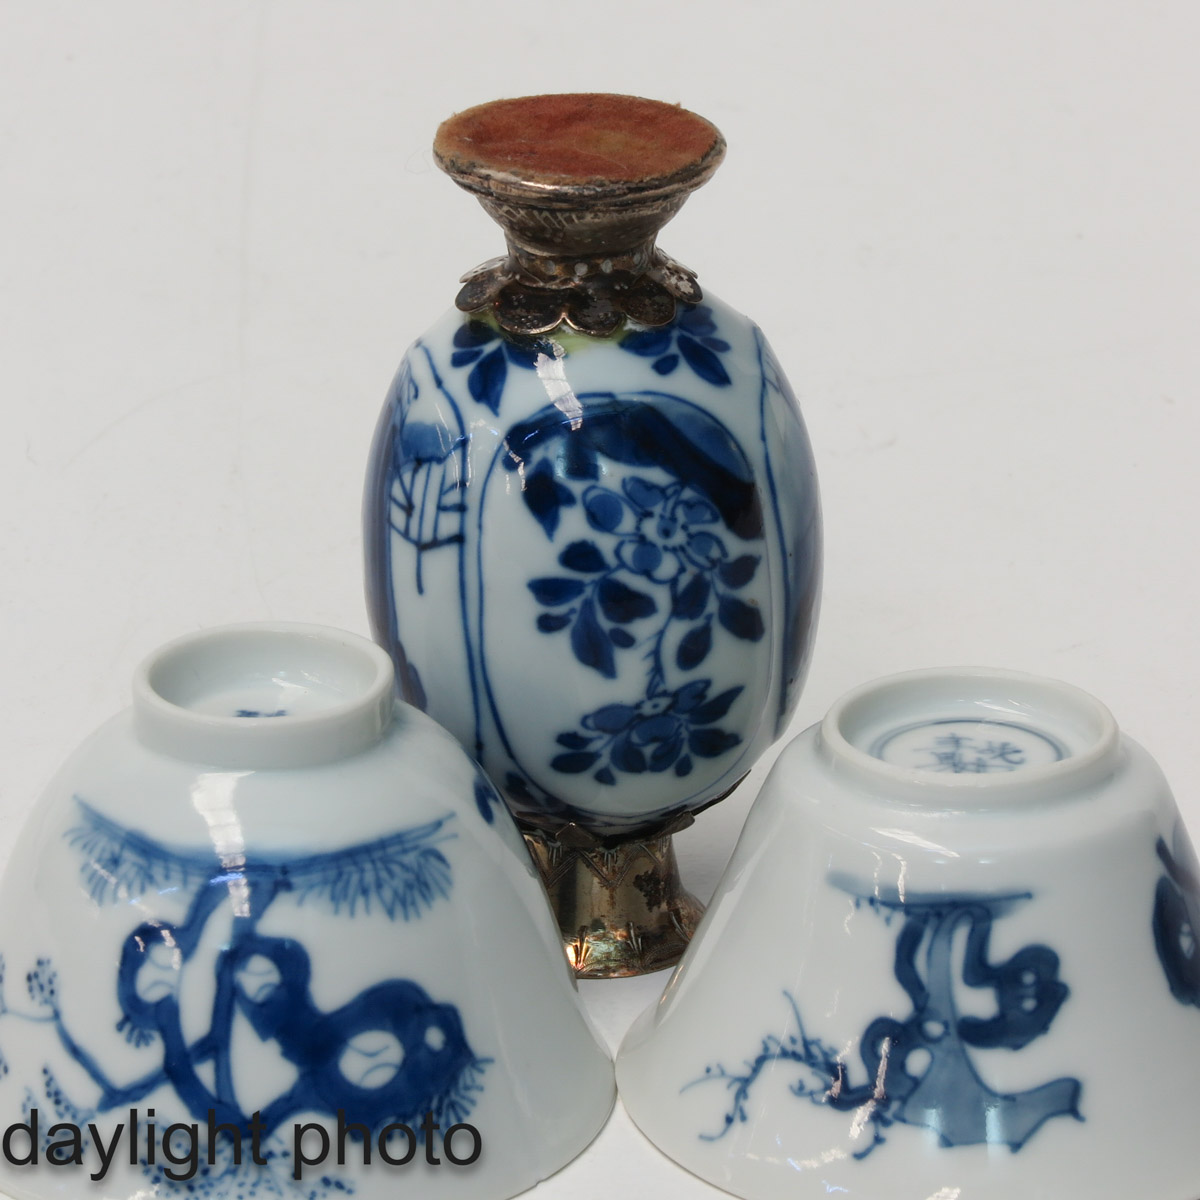 A Miniature Vase and 2 Small Cups - Image 8 of 10